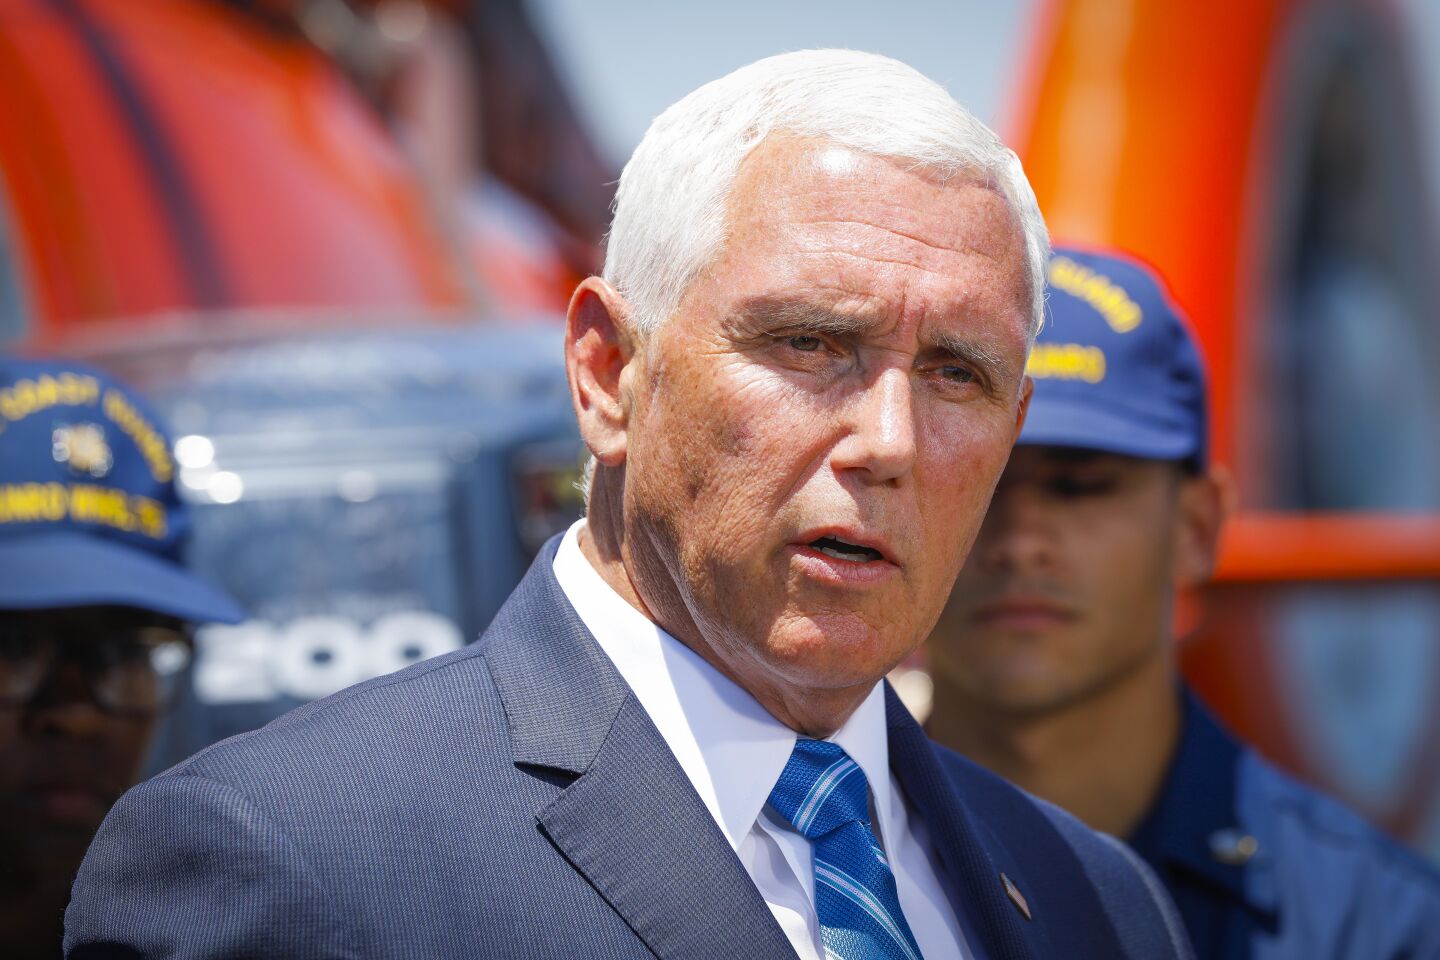 Vice President Mike Pence talks with reporters after delivering his remarks at Naval Air Station North Island aboard the U.S. Coast Guard cutter Munro, July 11, 2019, in Coronado, California during his first official trip to San Diego County since taking office.